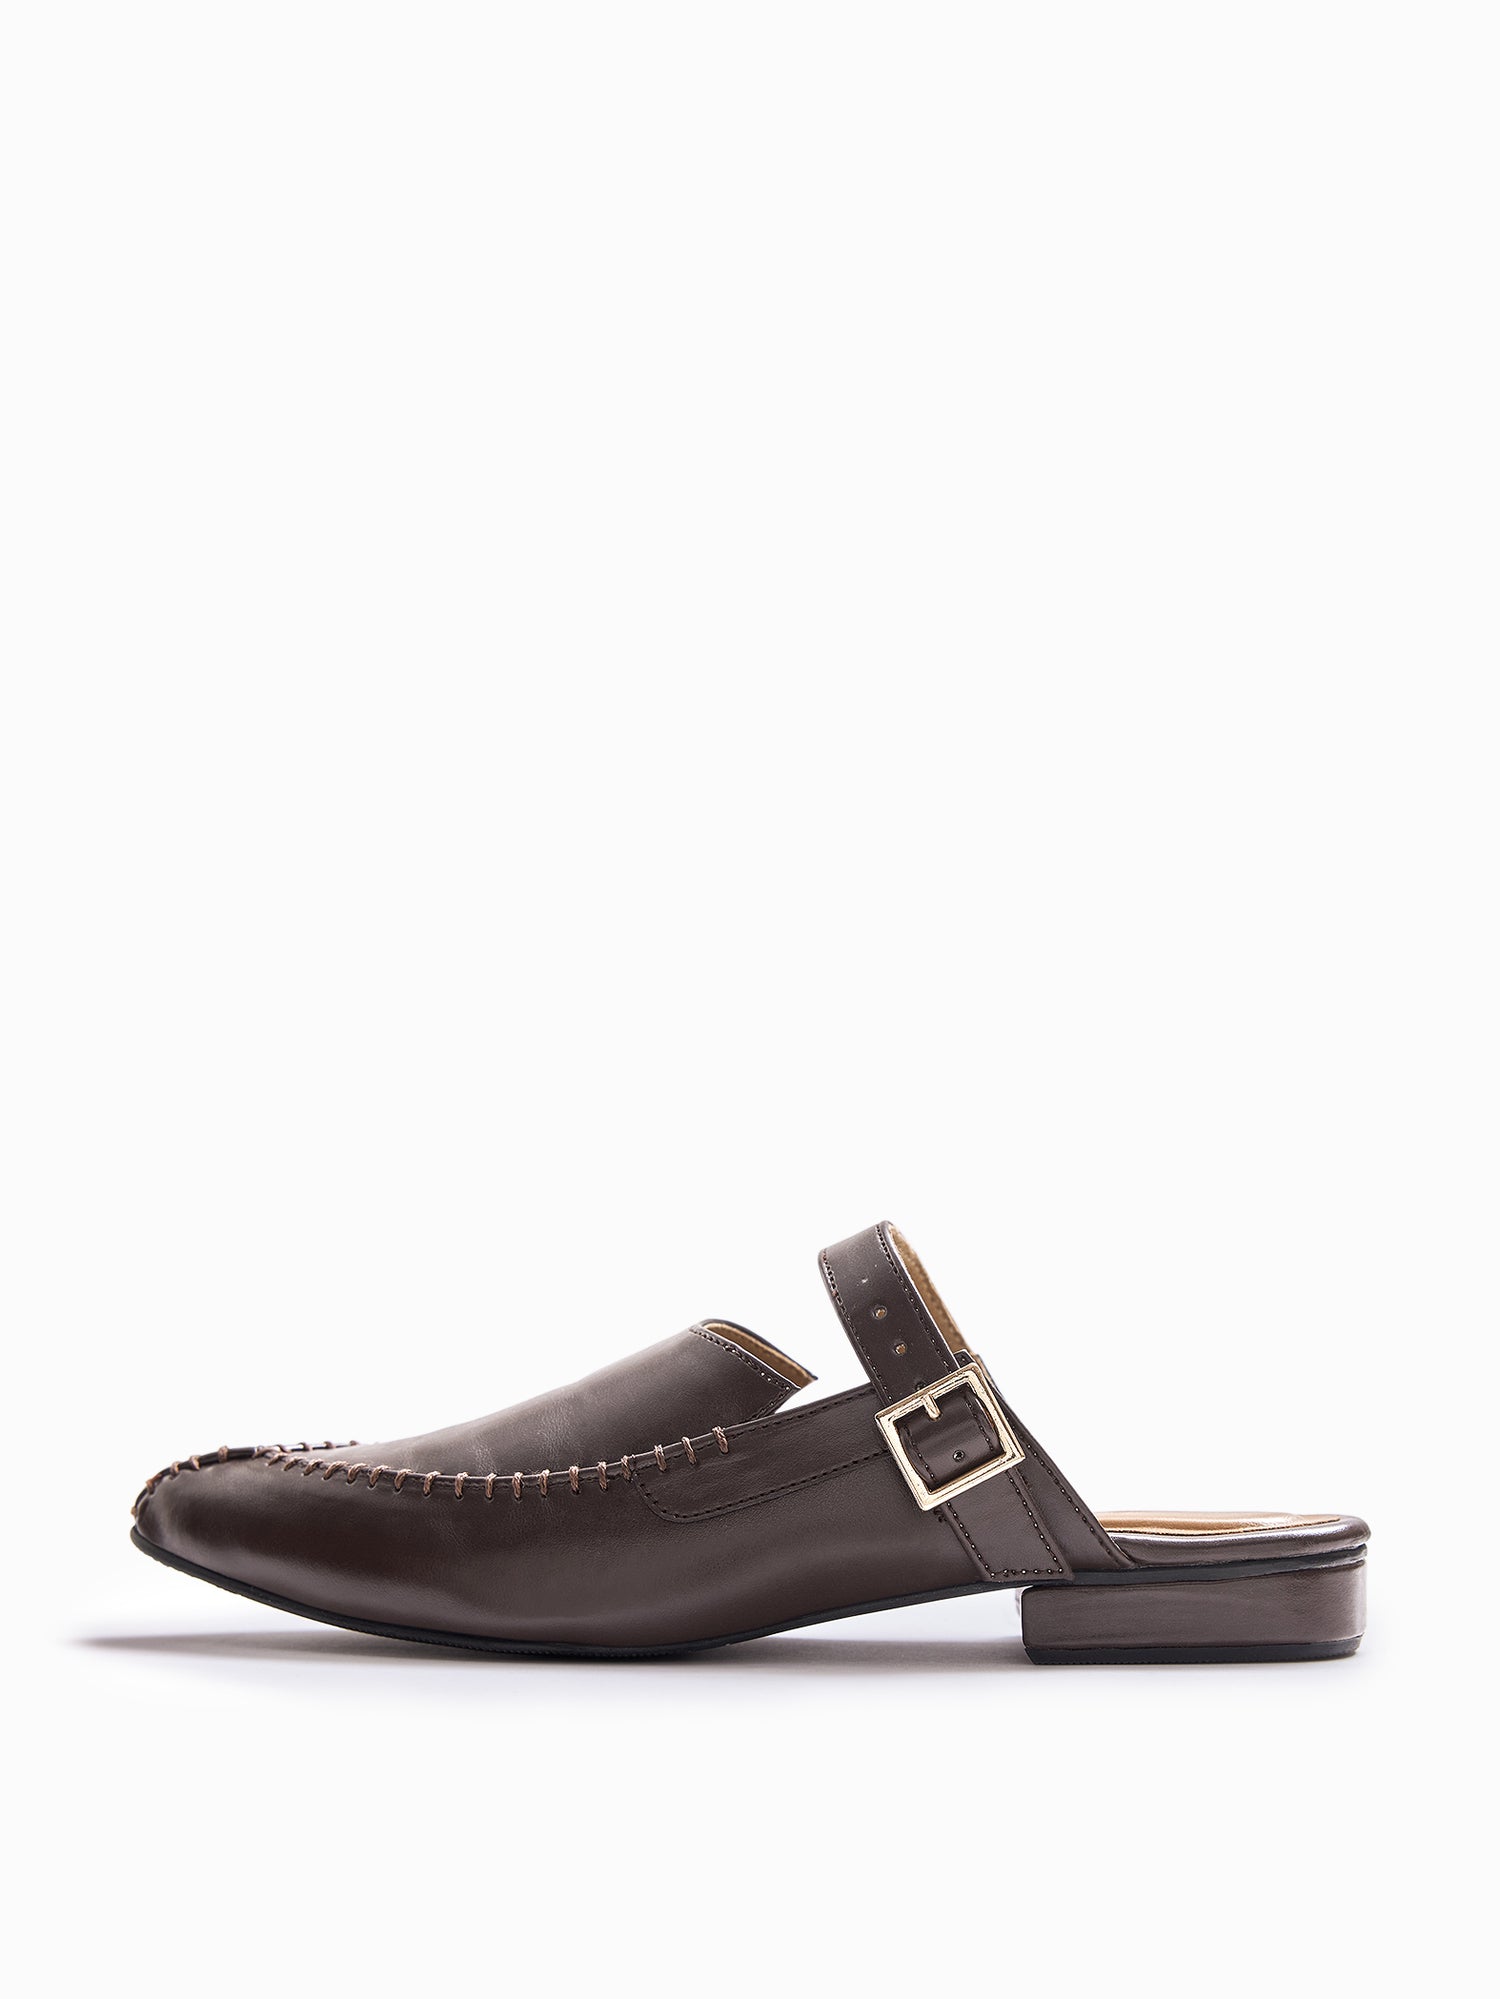 Chocolate Buckle Strap Mules